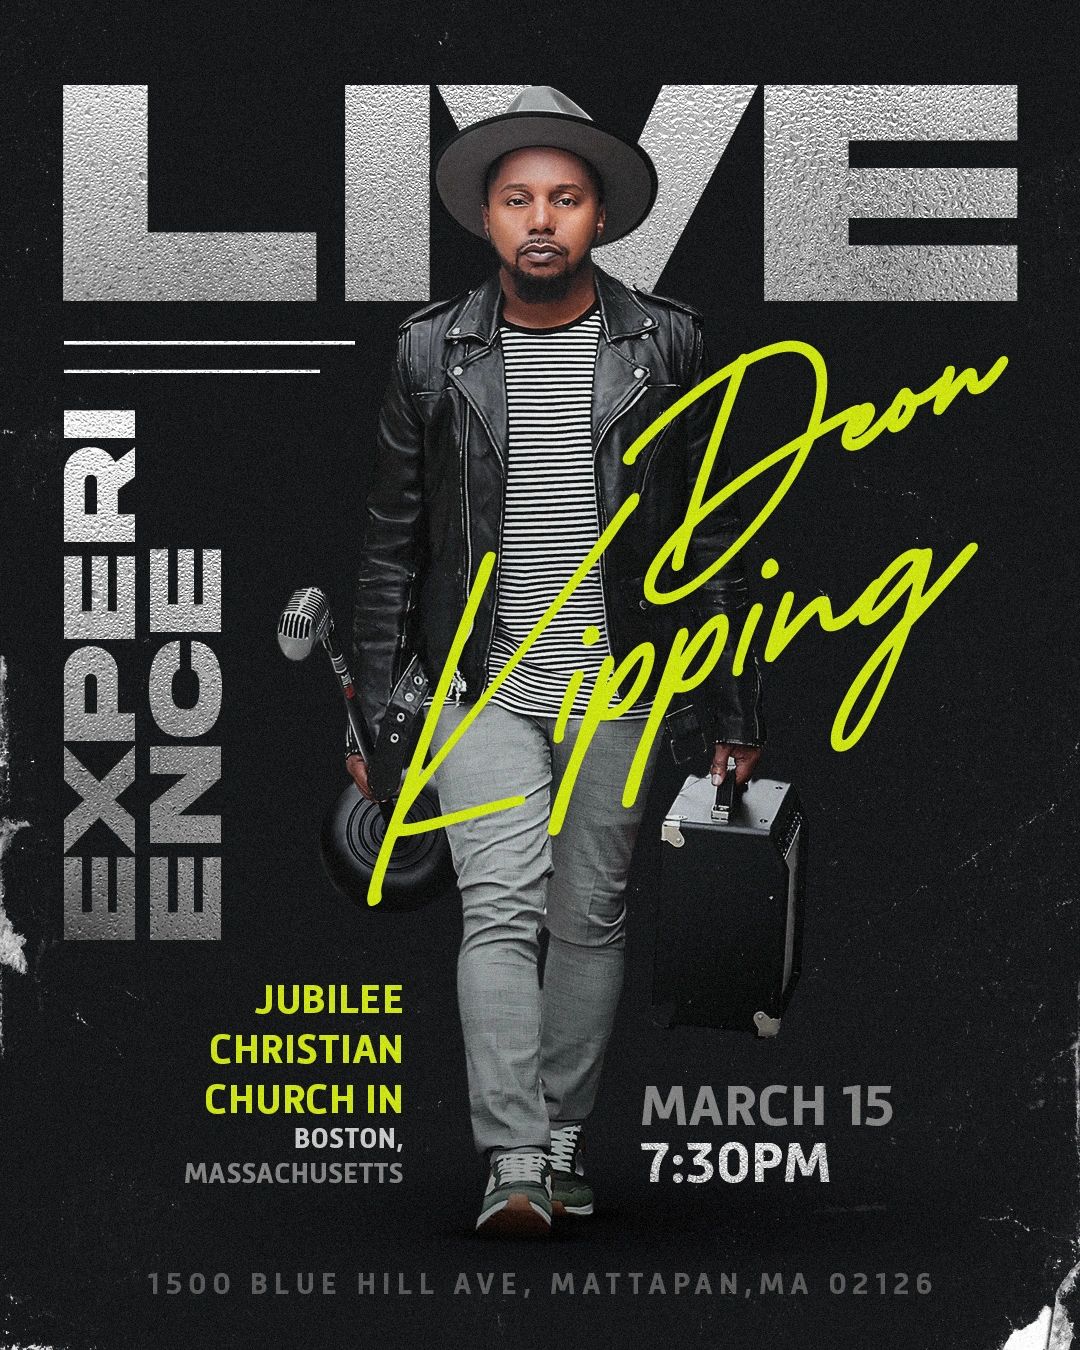 Deon Kipping Live Experience at Jubilee's Christian Church in Boston MA on March 15th at 7:30pm